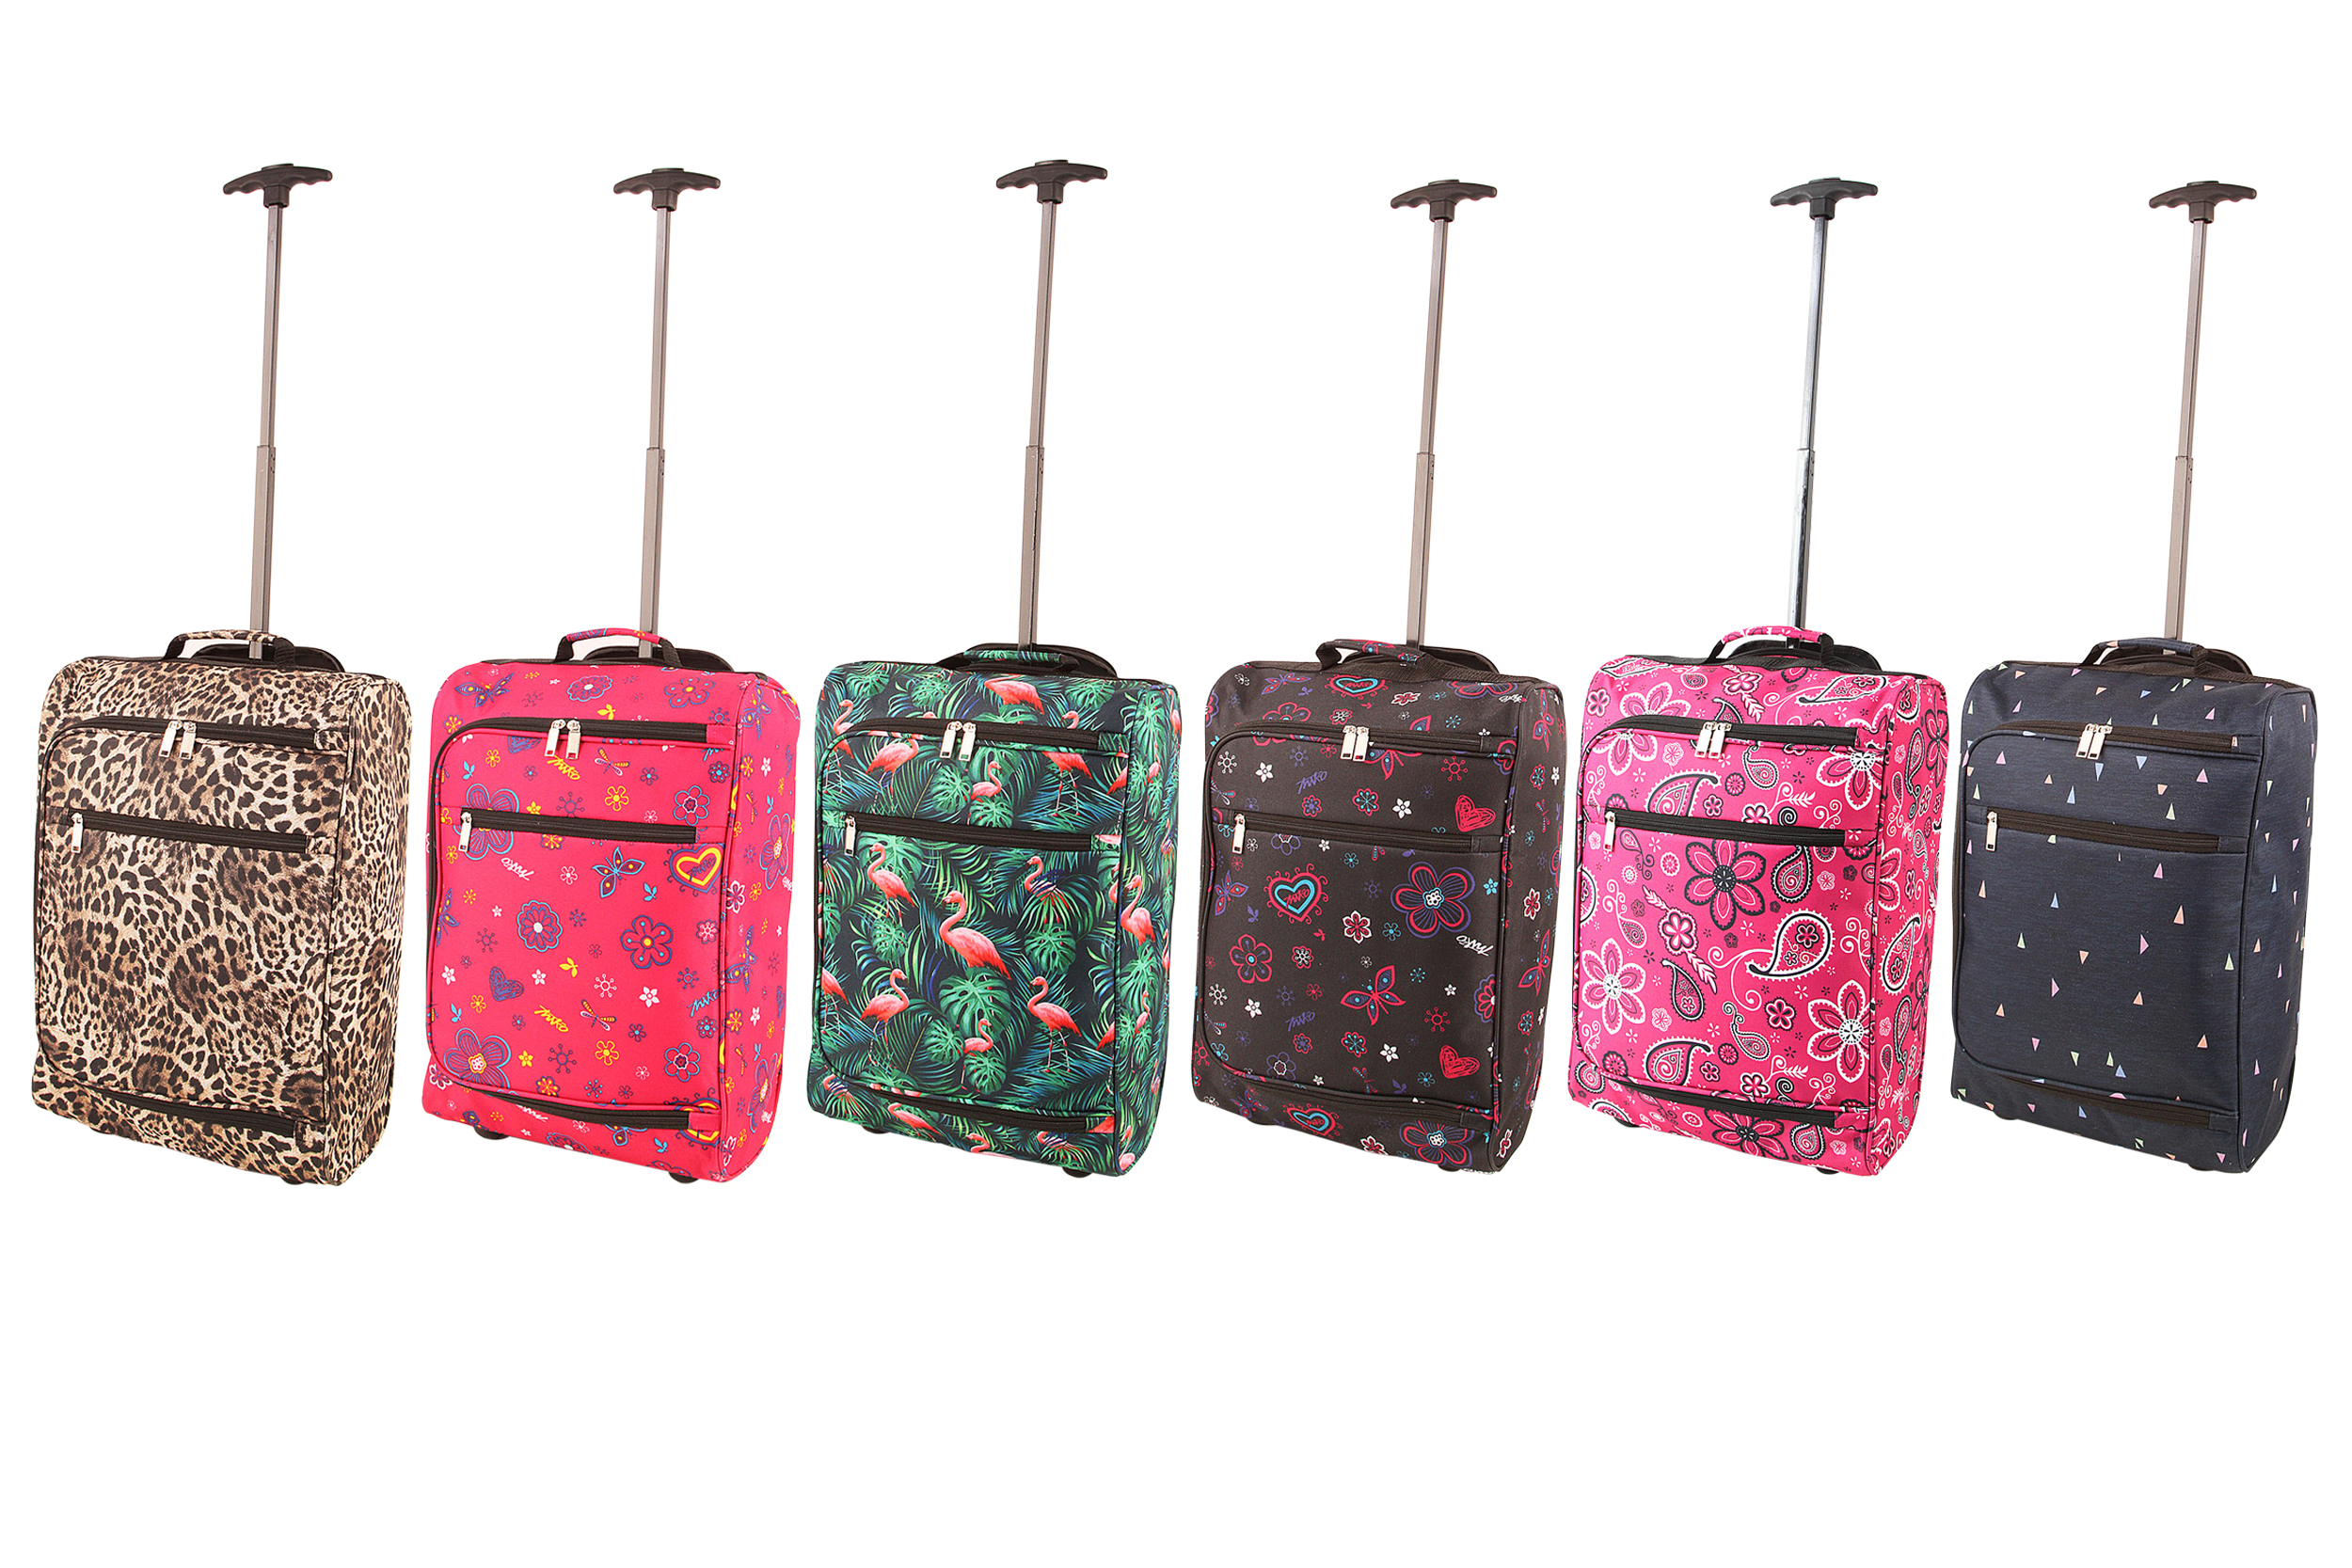 DJ Travel Ultra Light Cabin Size Wheeled Hand Luggage with